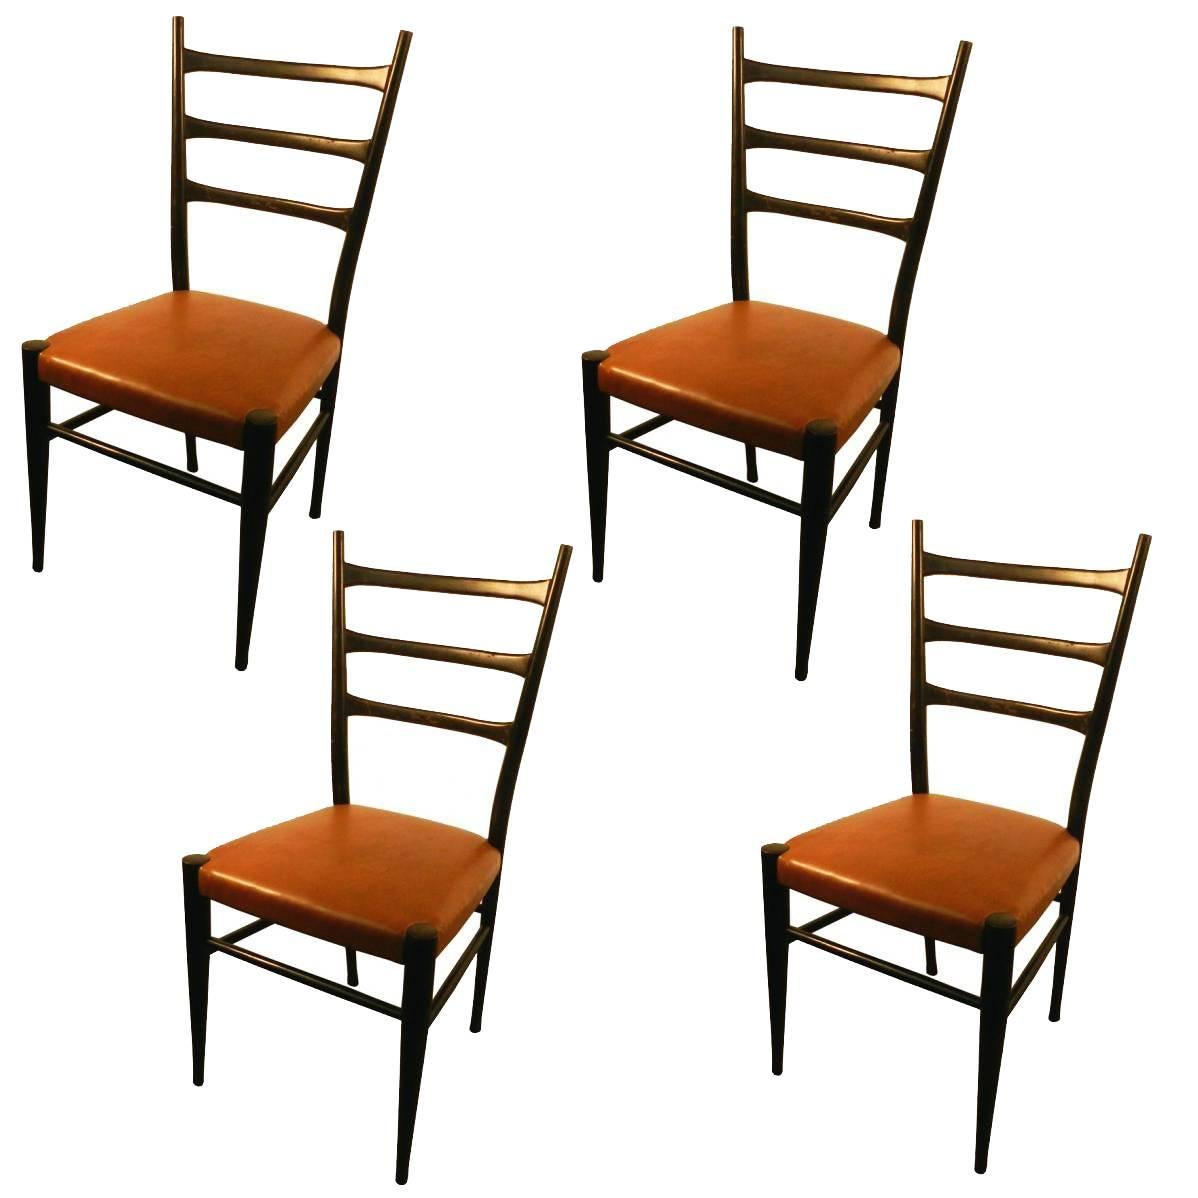 Four Italian Style Chairs, circa 1950-1960 For Sale